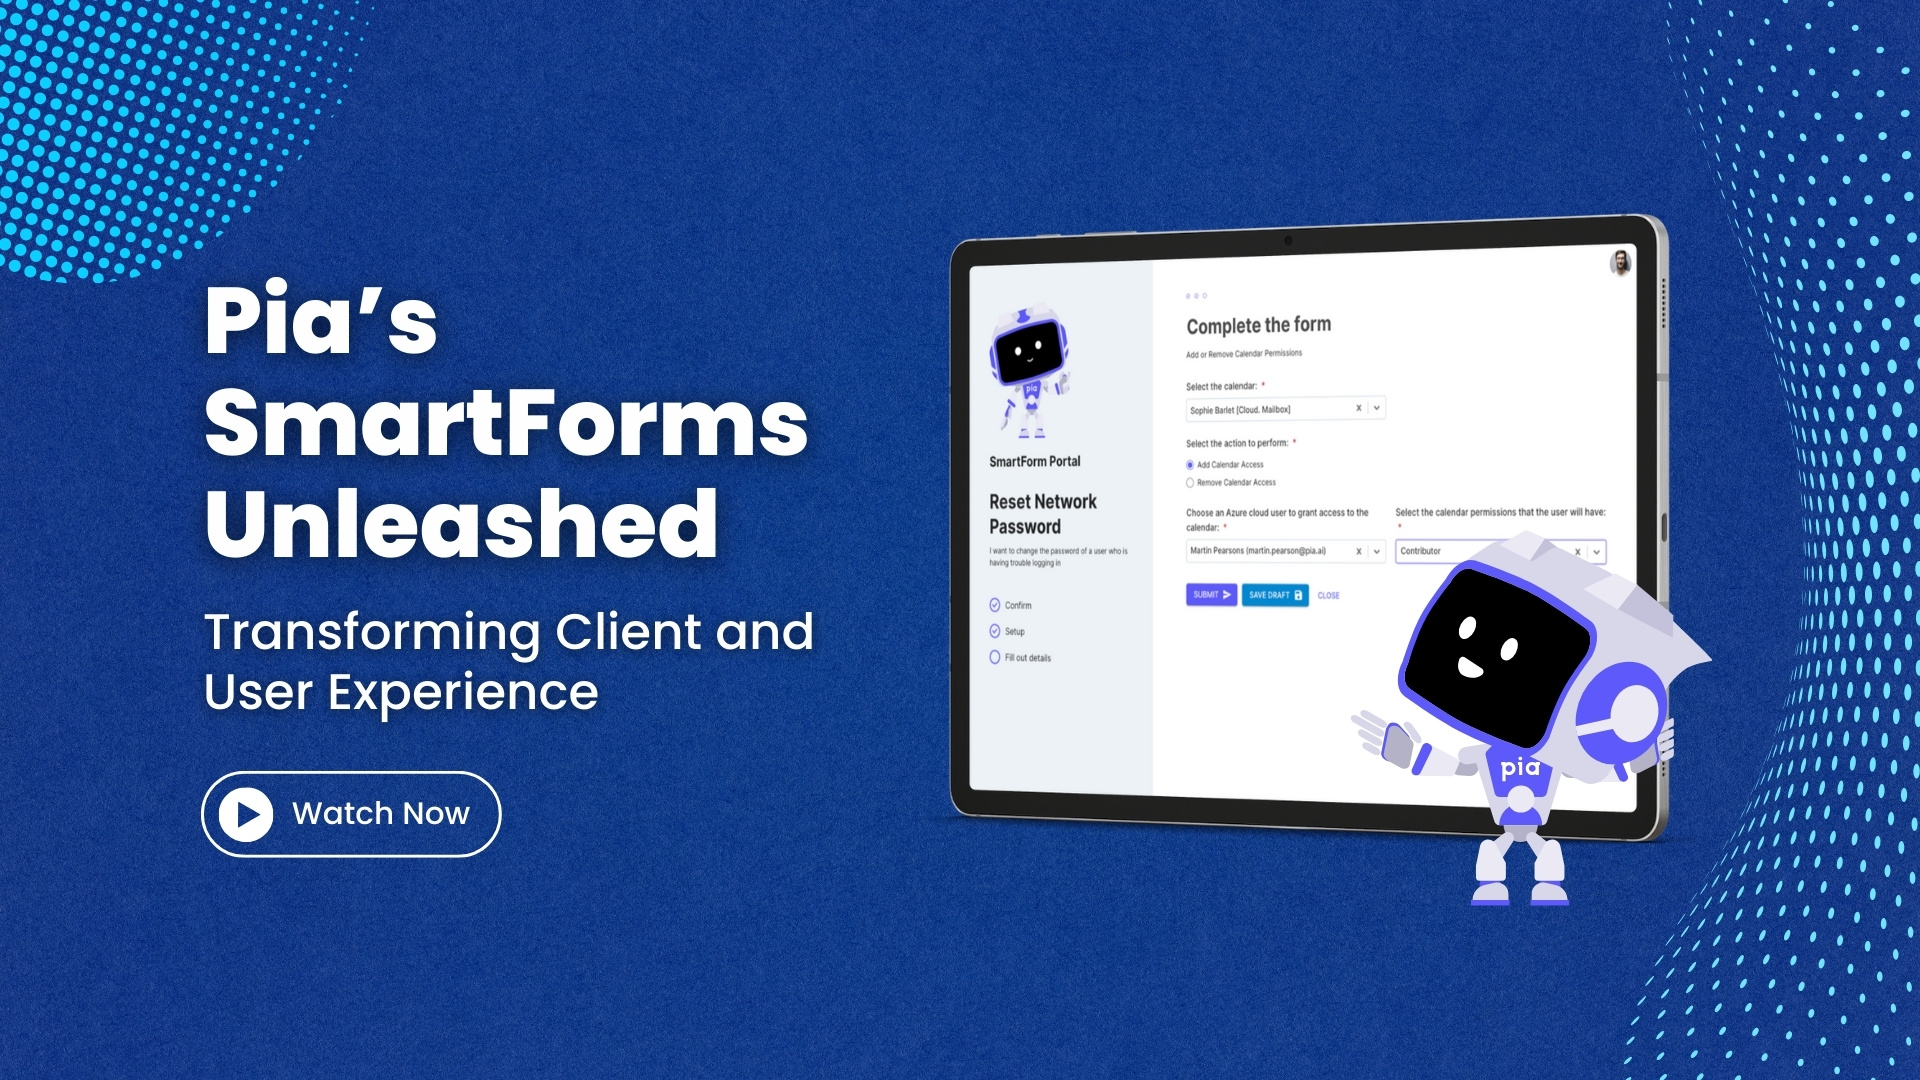 Pia’s SmartForms Unleashed – Transforming Client and User Experience